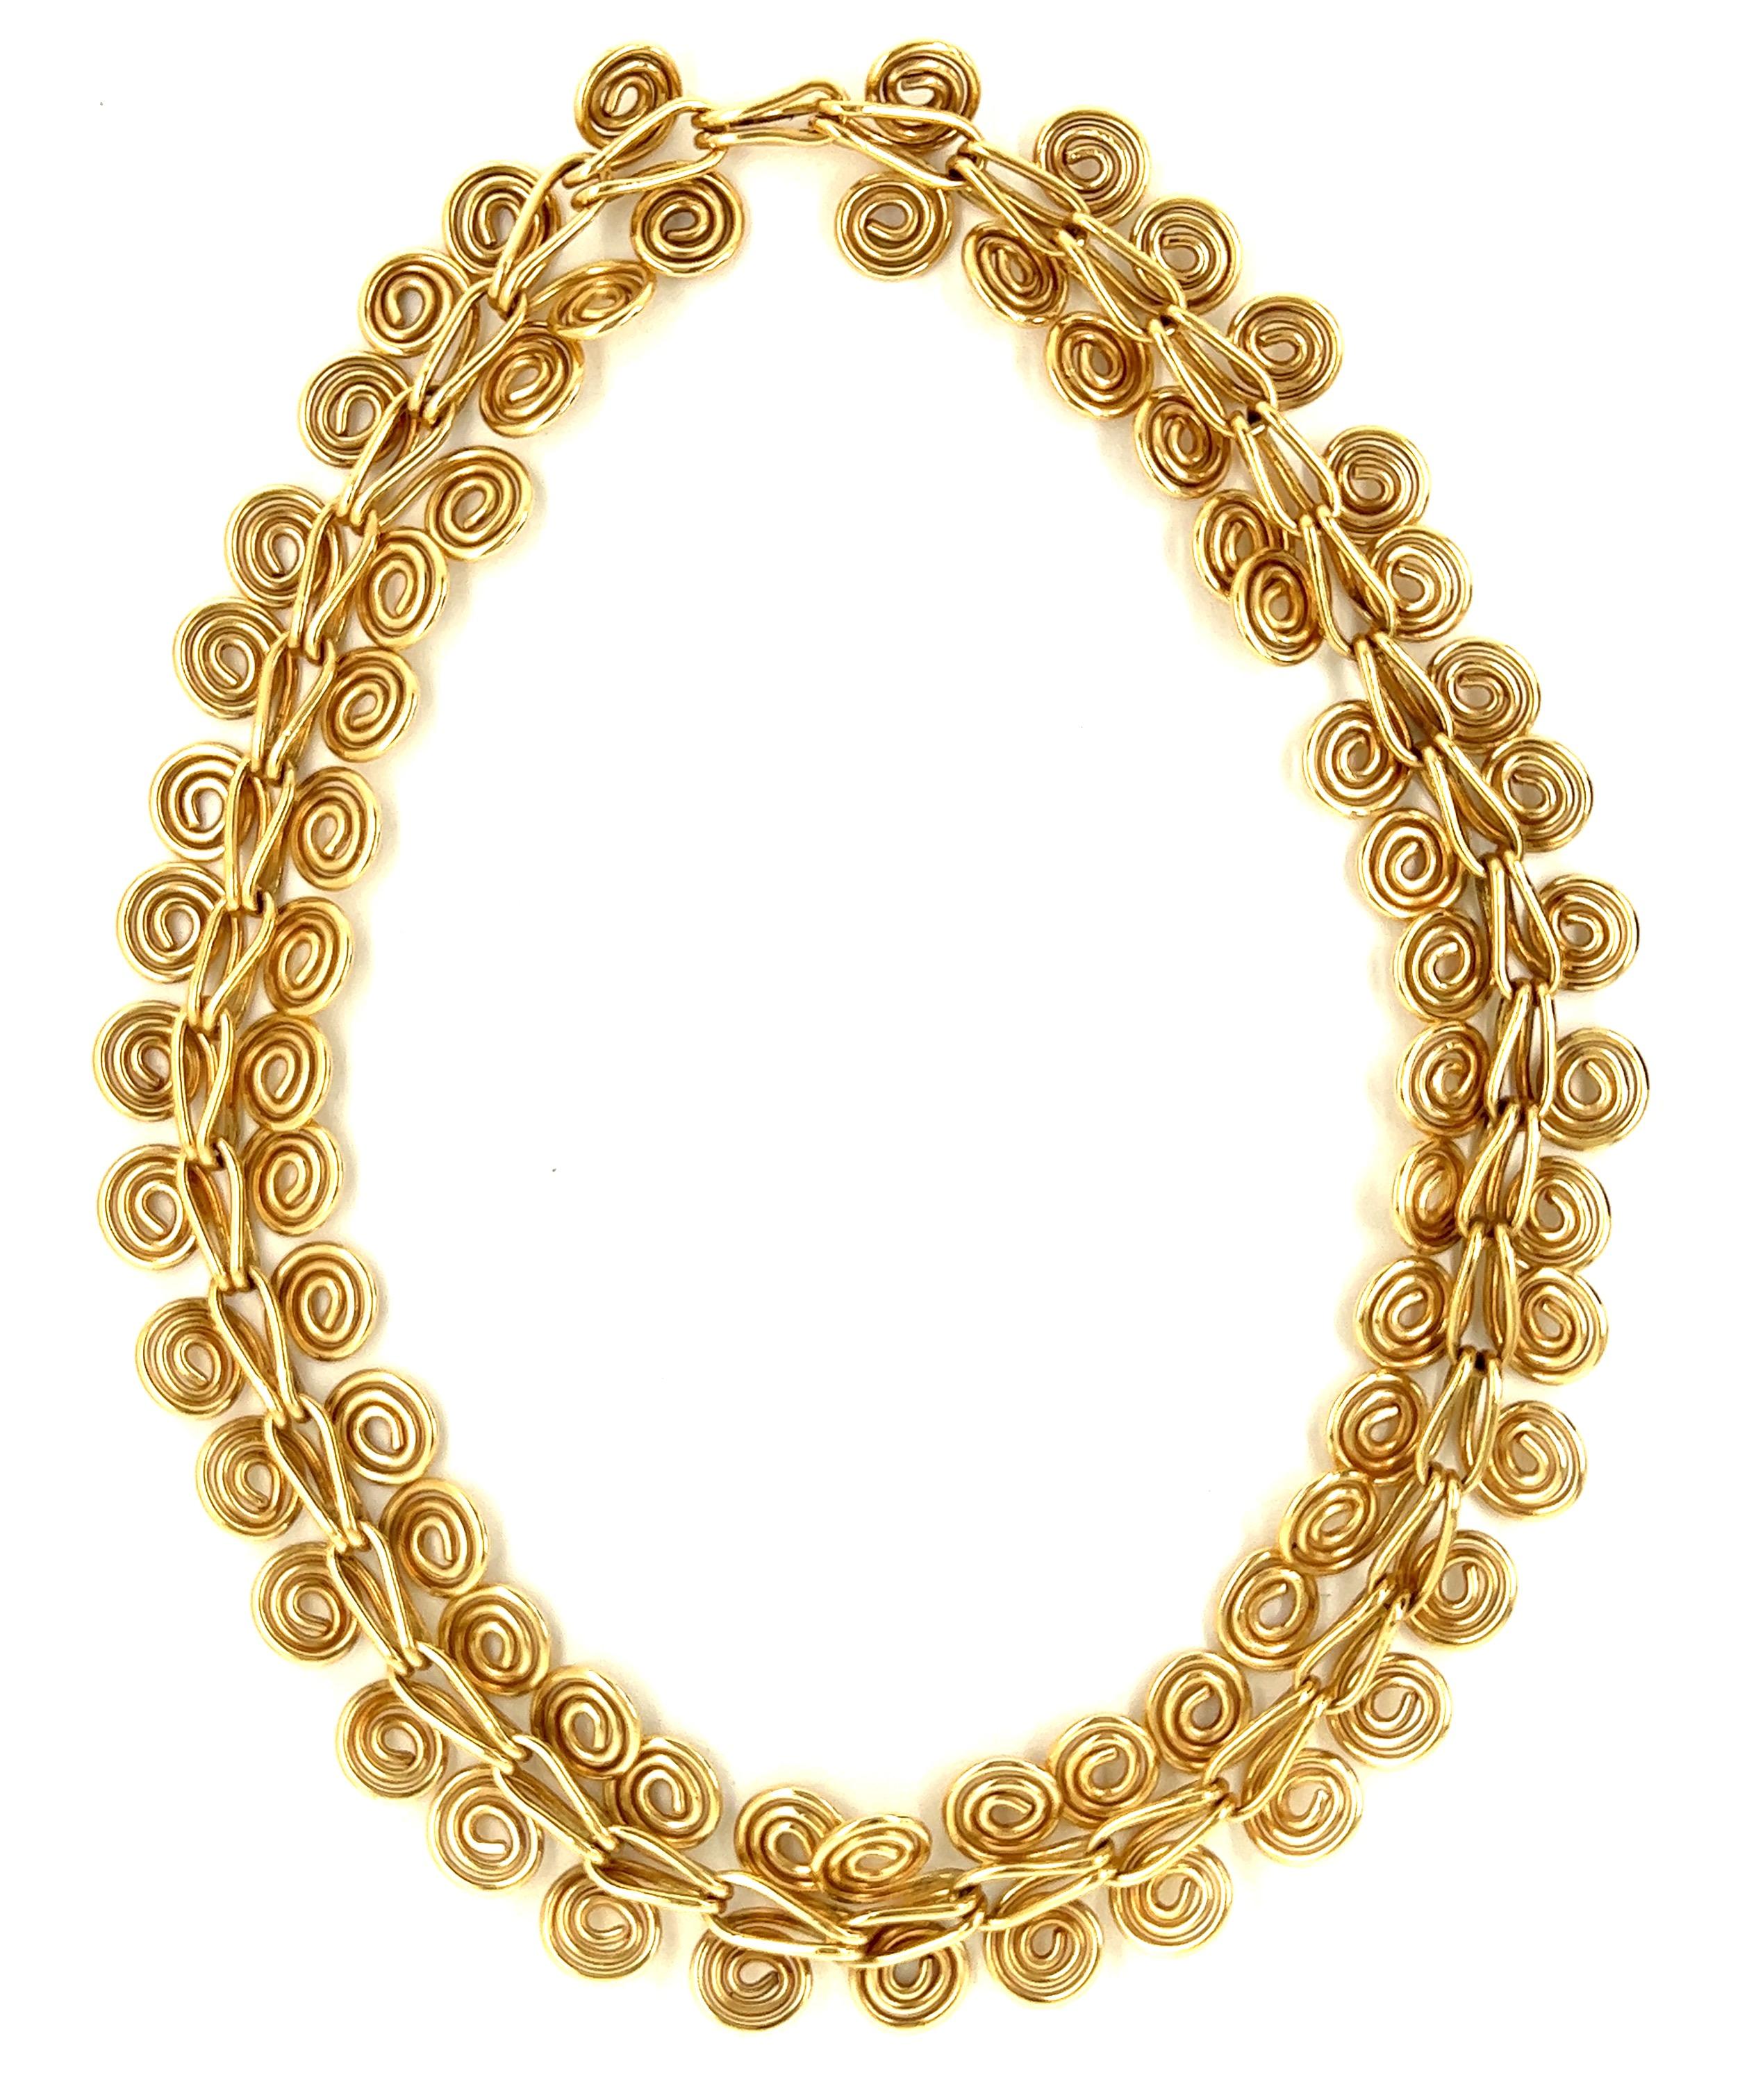 Swirl Design 14k Yellow Gold Collar Necklace  For Sale 2